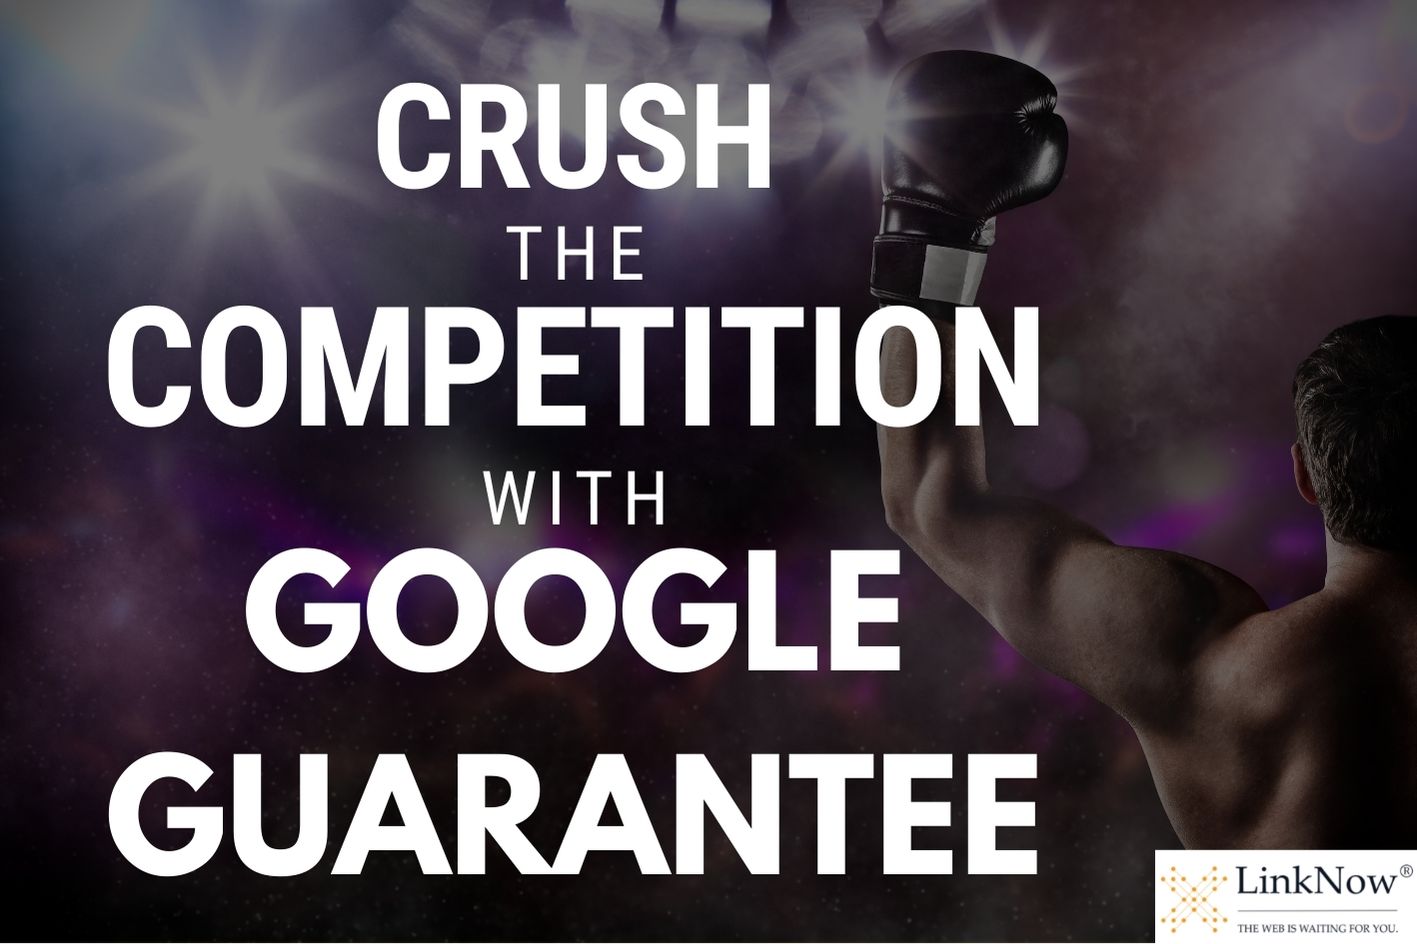 In background, a boxer raises his arms in victory. In foreground, text says: "Crush the competition with Google Guarantee."